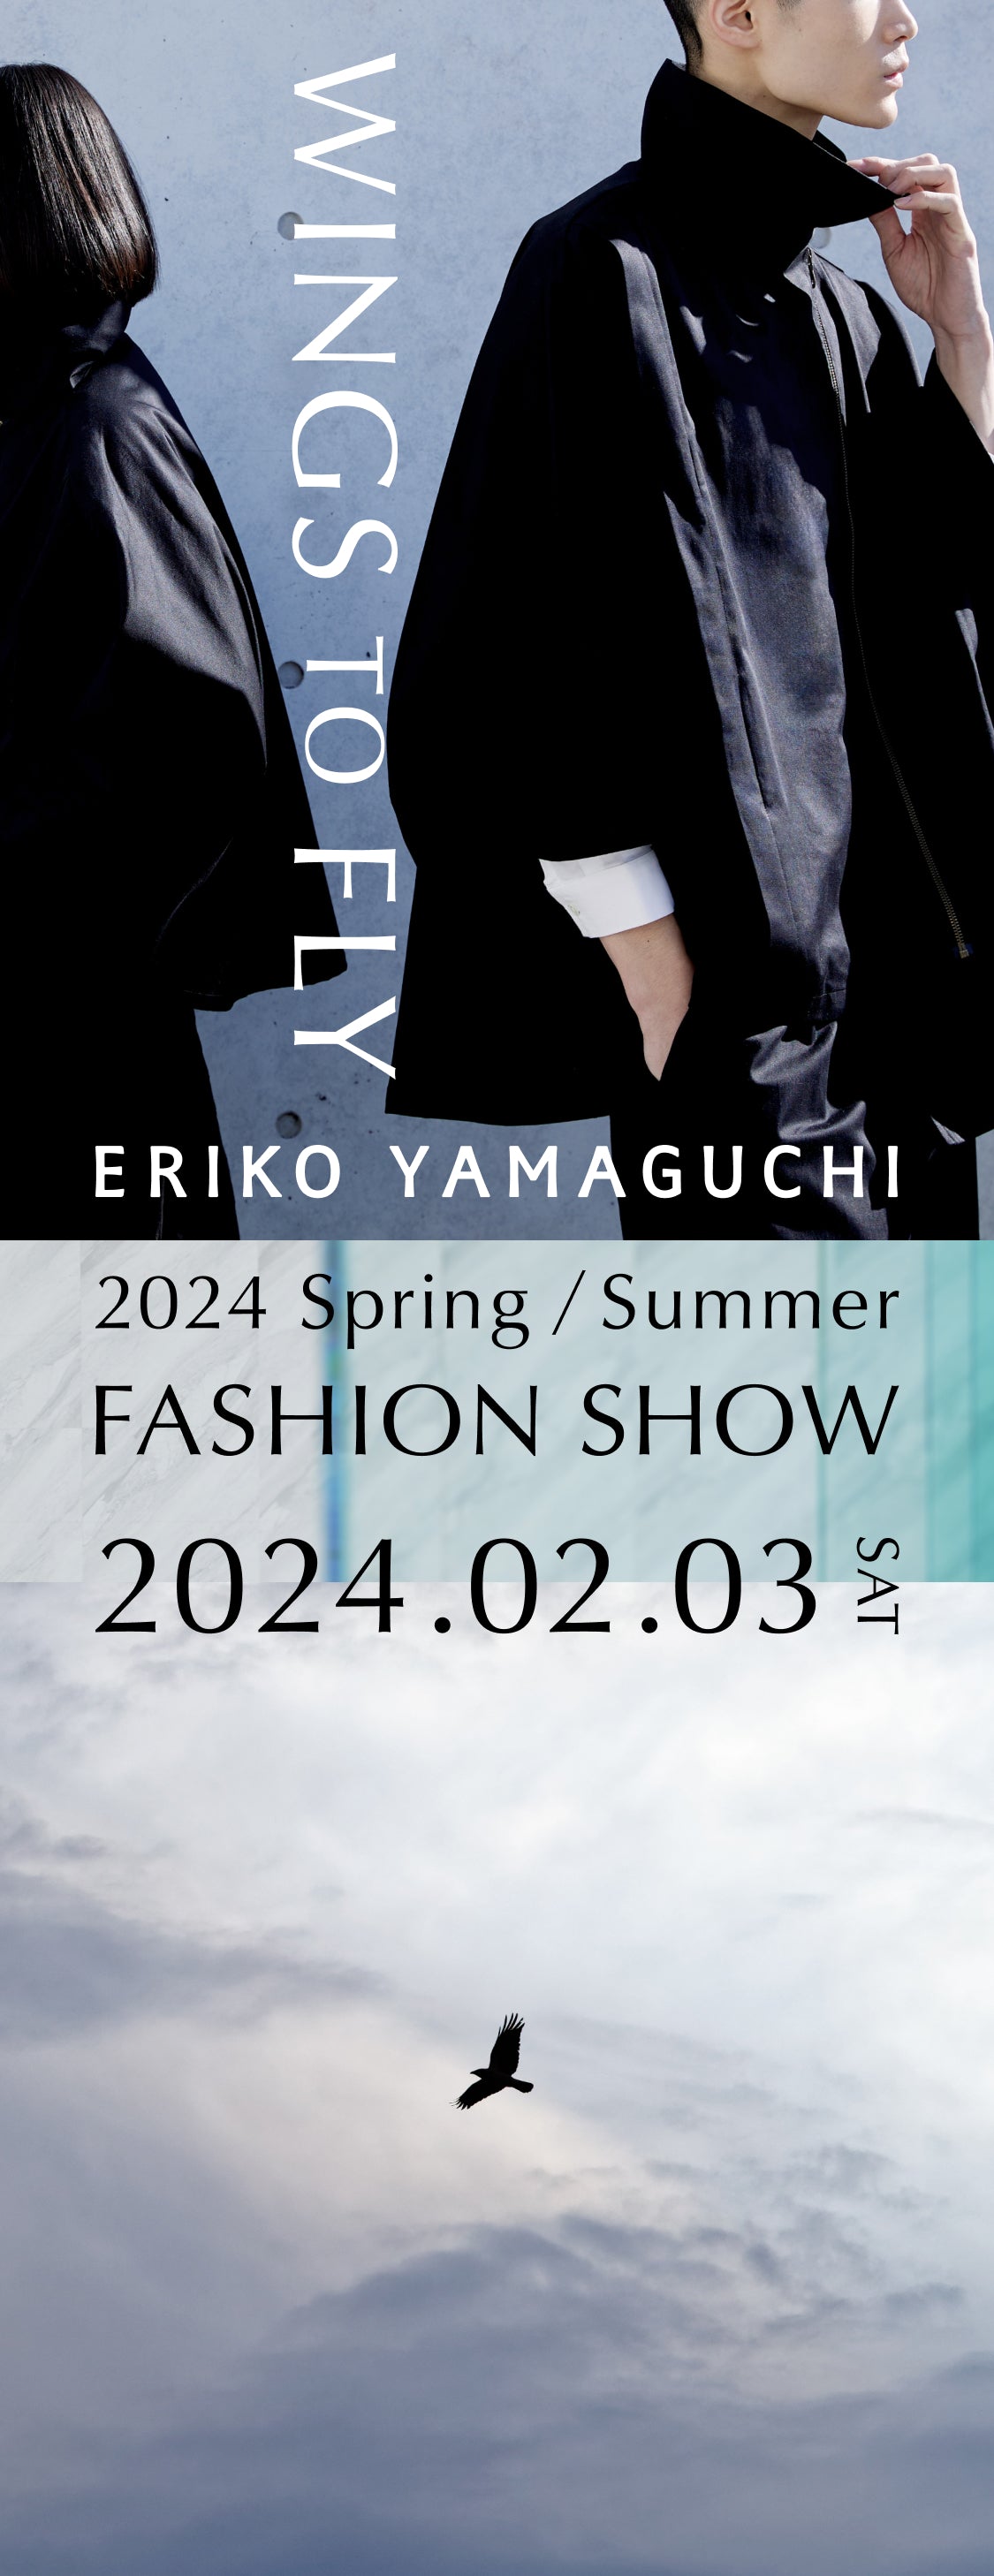 ERIKO YAMAGUCHI 2024 Spring / Summer FASHION SHOW 2024/02/03 SATURDAY - WINGS to FLY - Place ワールド北青山ビル